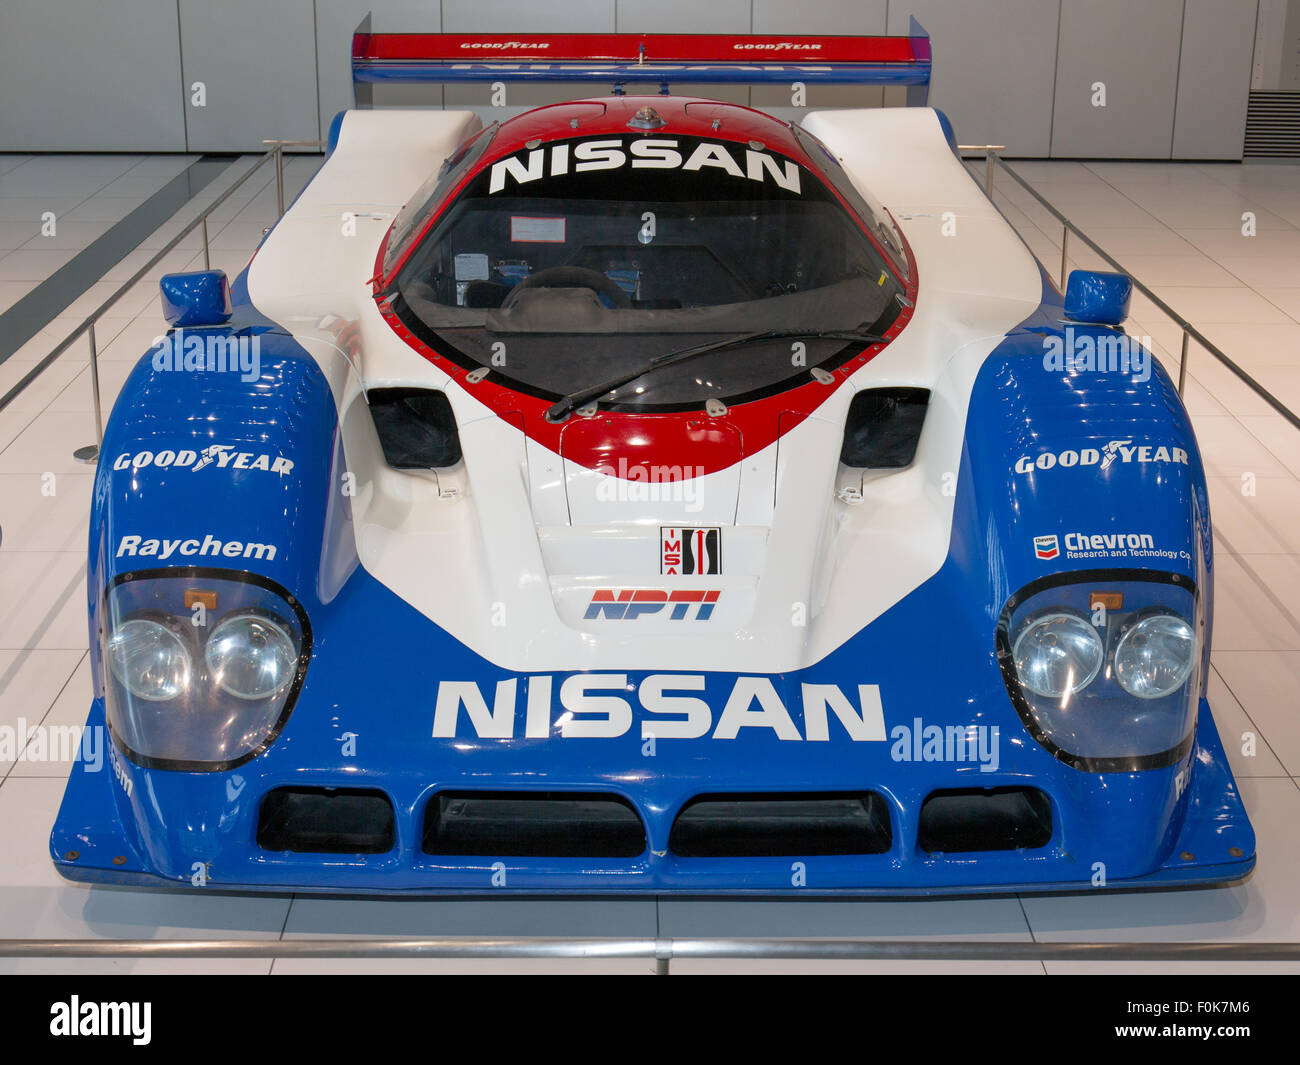 Nissan R90CK front 2015 Nissan sede centrale globale Gallery Foto Stock